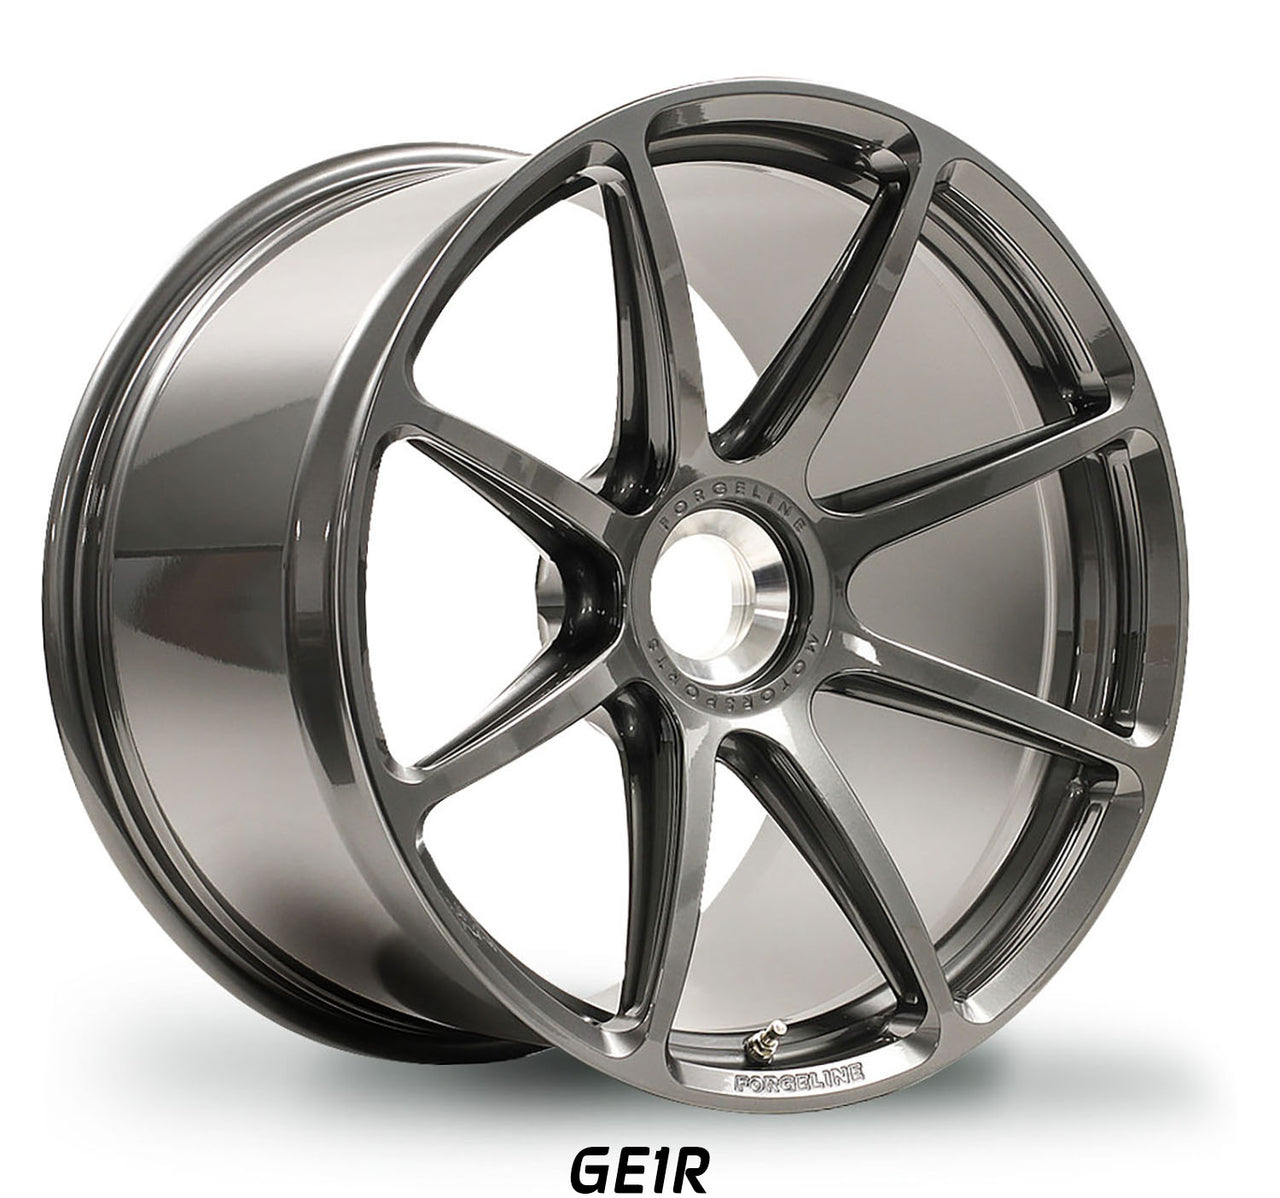 Pearl Gray Forgeline GE1R center lock for Porsche 991 GT3RS and GT2RS best pricing on wheels for HPDE and Time Trials